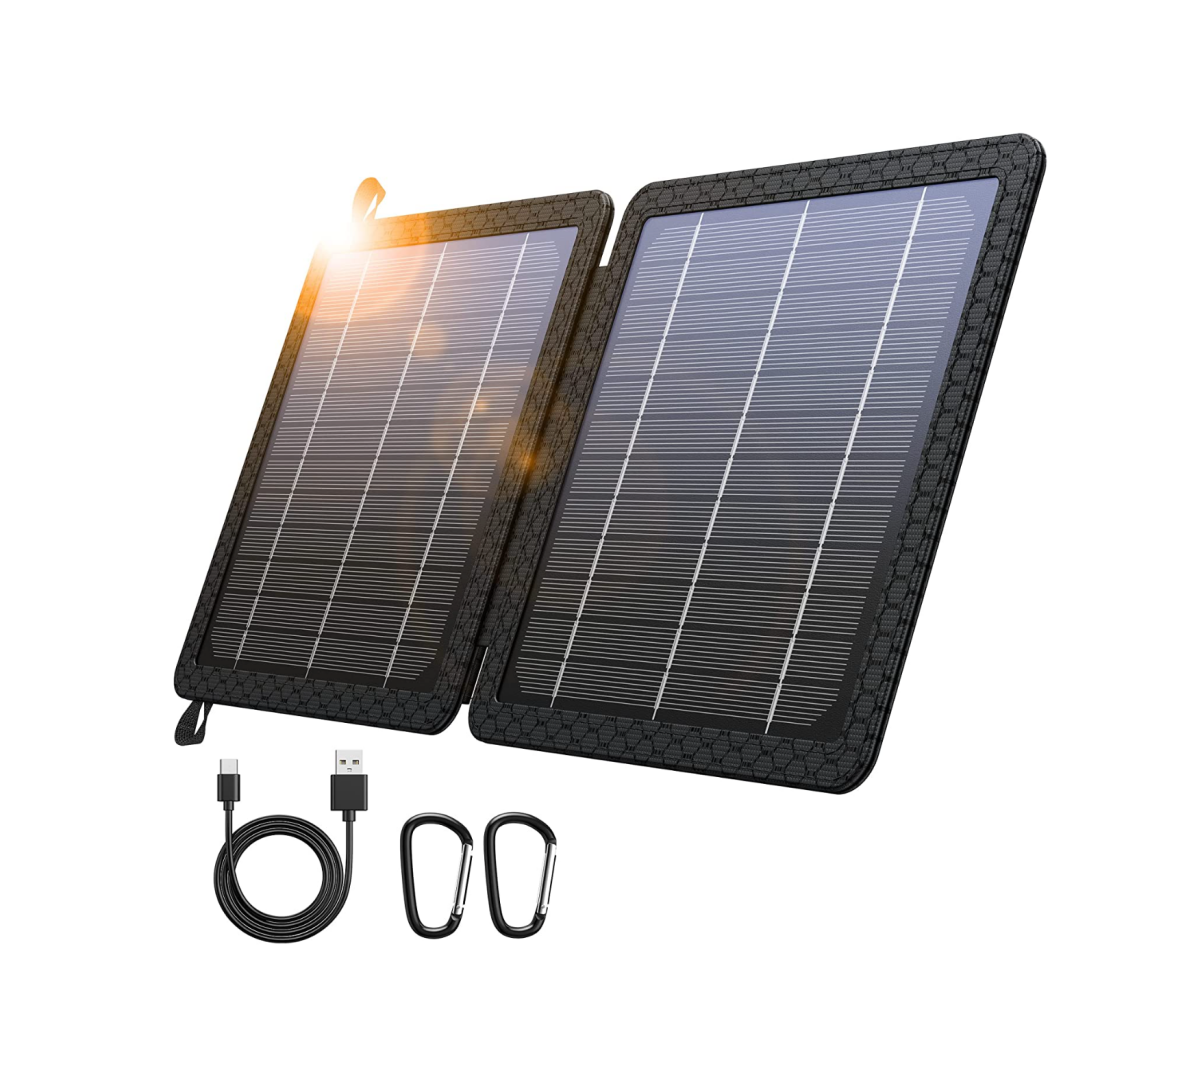 A Blavor 10W Portable Solar Charger with hooks and cable